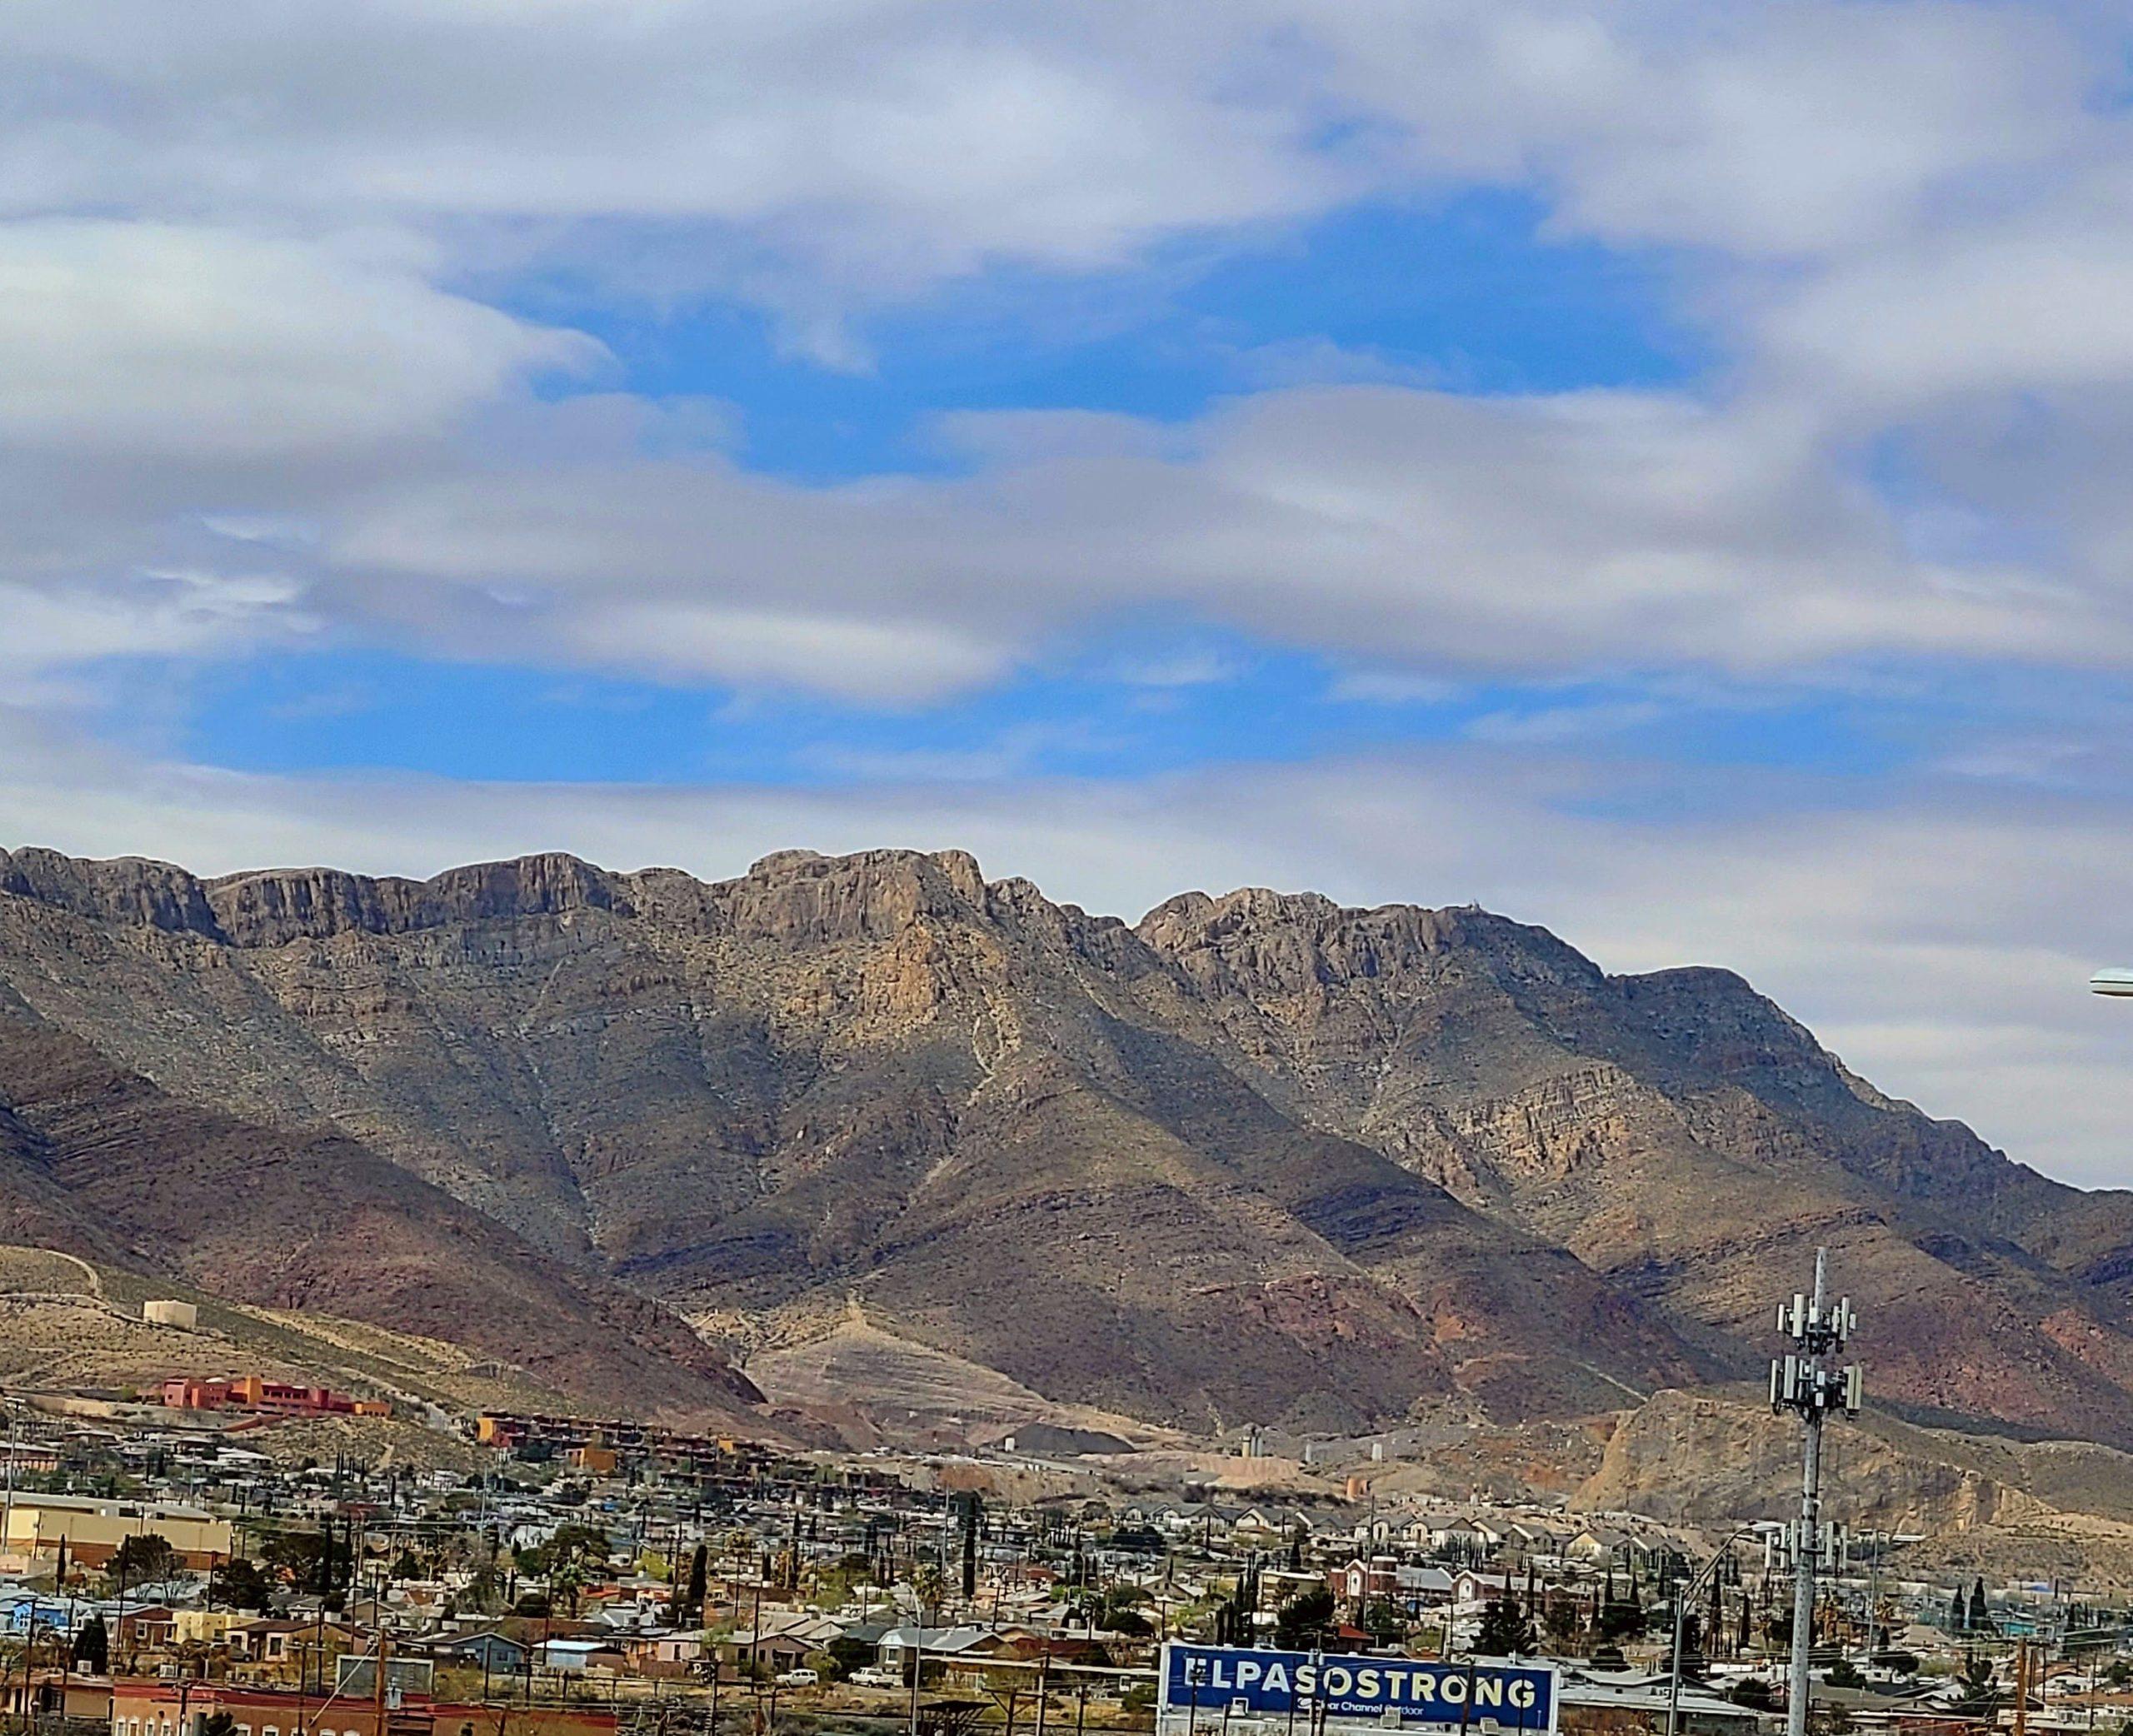 Image shows the mountainous landscape within the El Paso desert, as well as part of the city. 